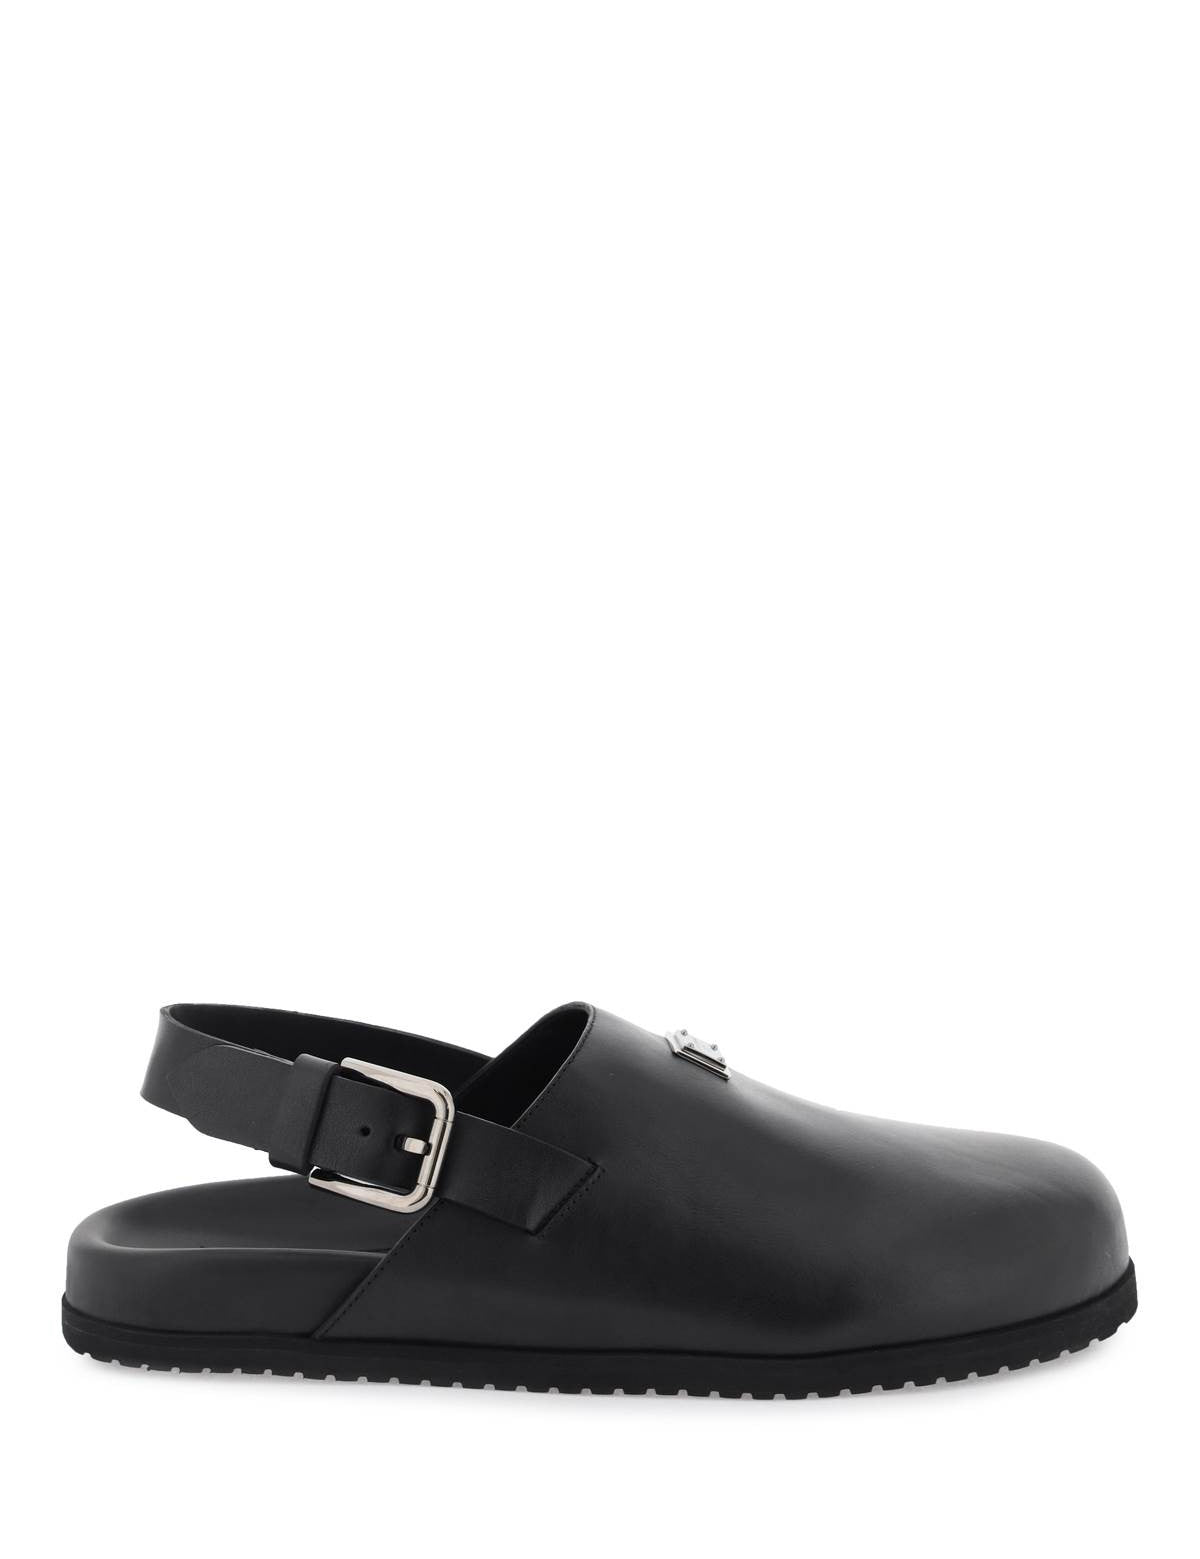 dolce-gabbana-leather-clogs-with-buckle.jpg